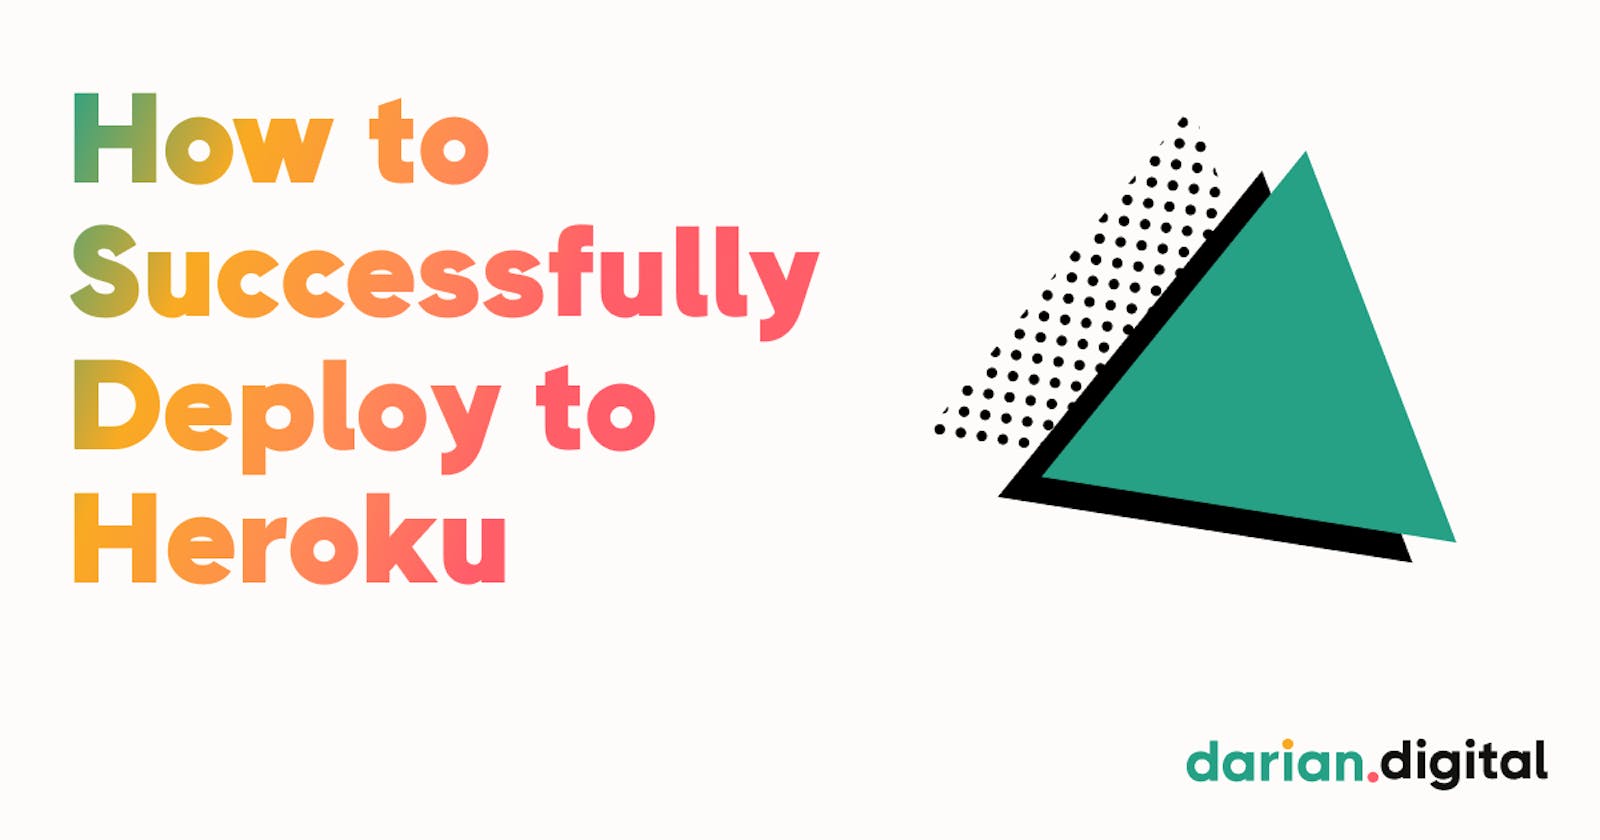 How to Successfully Deploy to Heroku